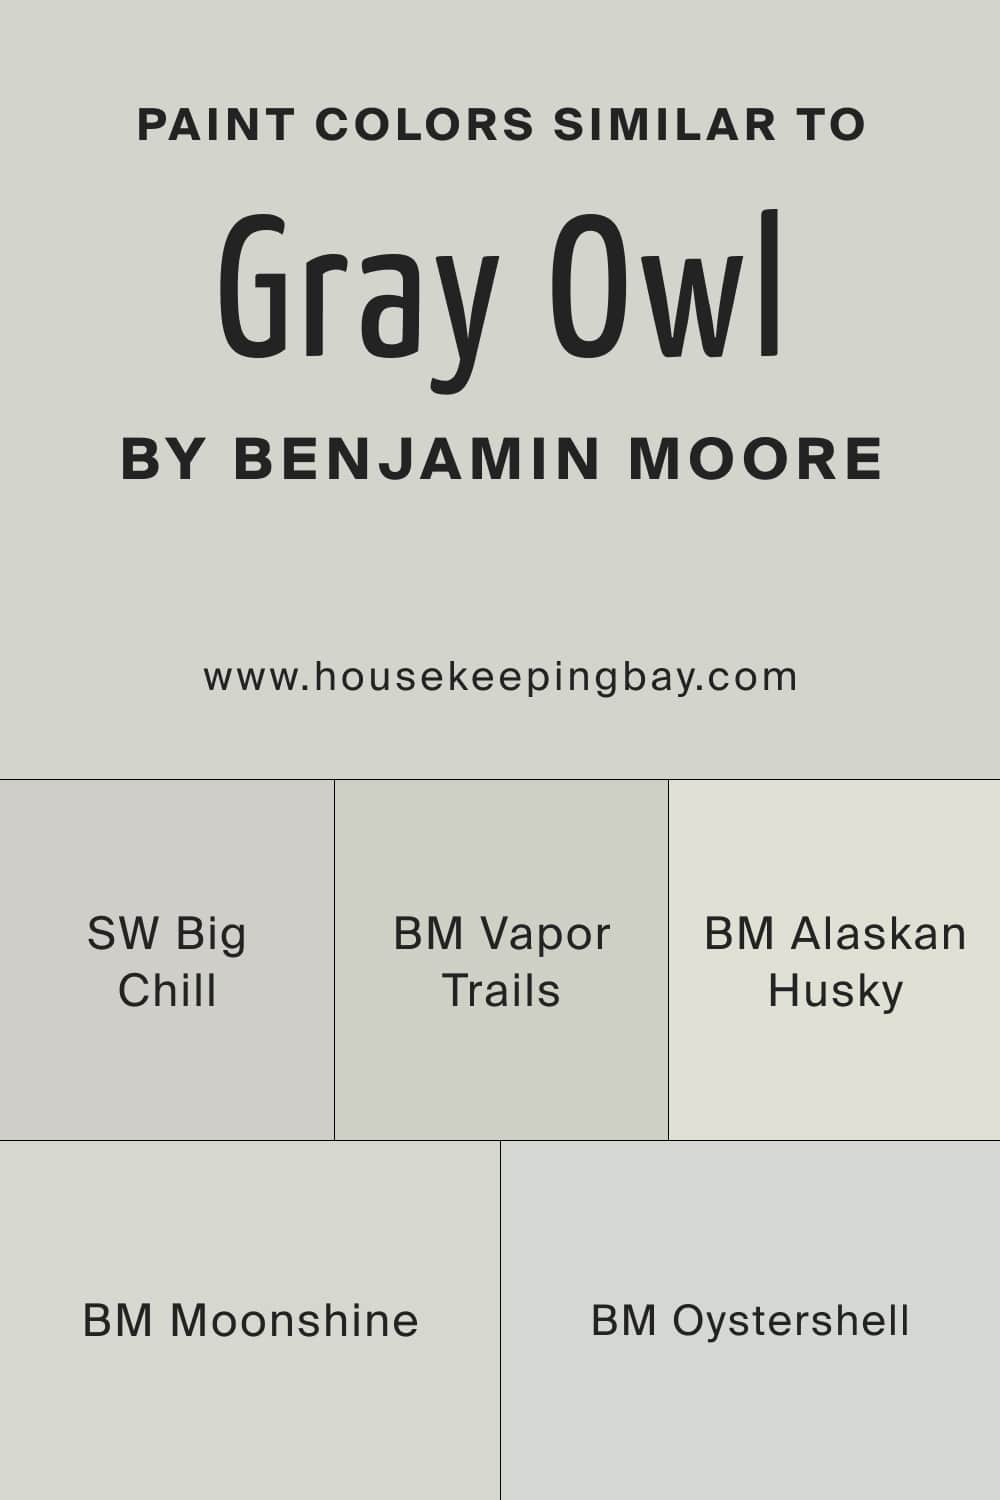 Paint Colors Similar to Gray Owl 2137 60 by Benjamin Moore